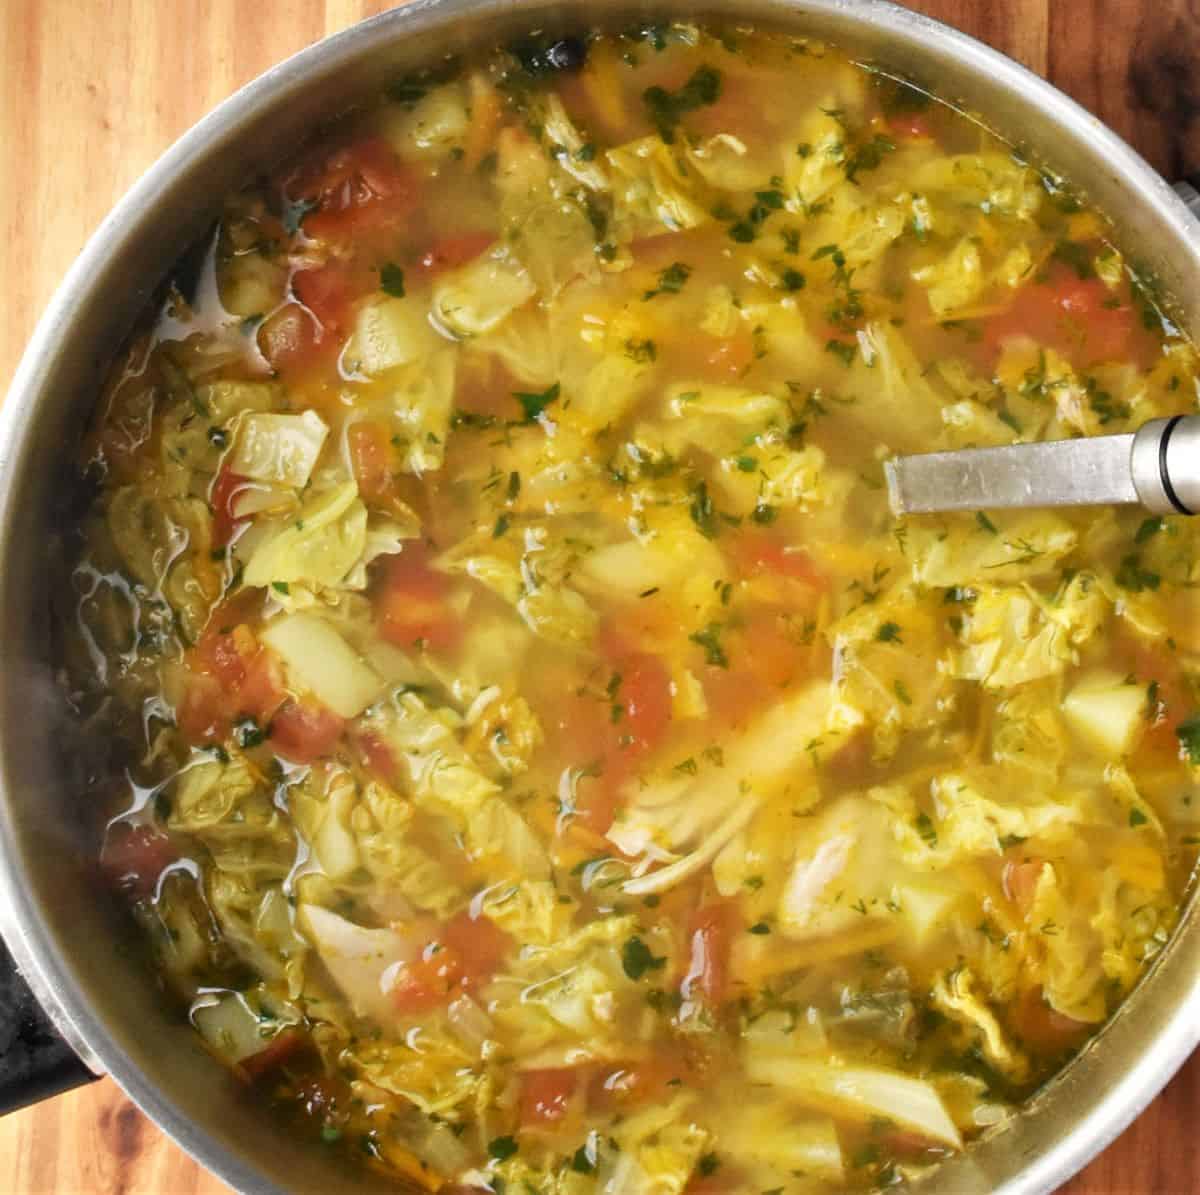 Shredded cabbage and chicken soup in large pot with ladle.